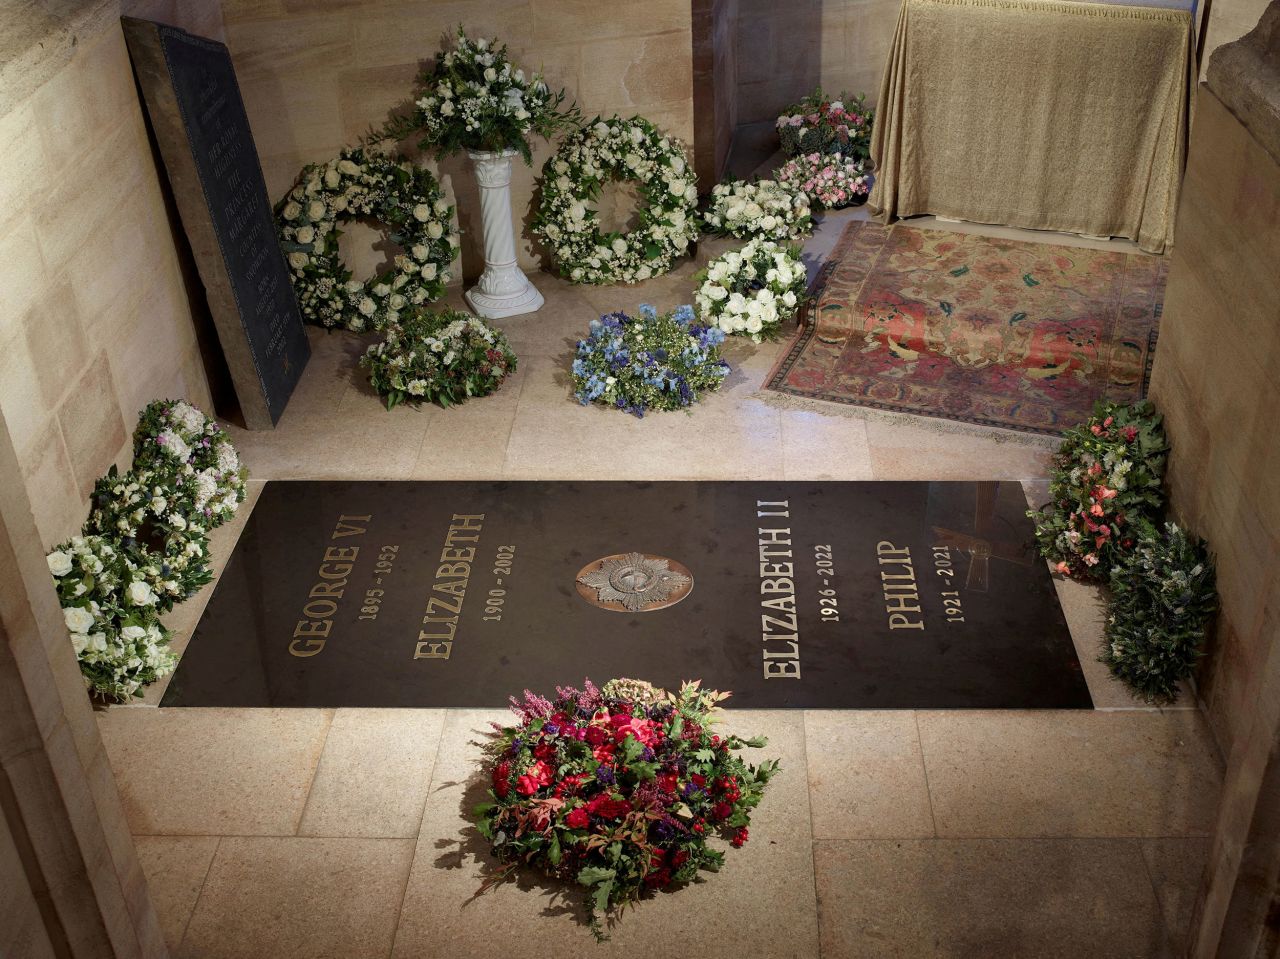 <a href="https://www.cnn.com/2022/09/24/uk/queen-elizabeth-king-george-chapel-photograph-intl-gbr/index.html" target="_blank">The final resting place of Britain's Queen Elizabeth II</a> is seen within St. George's Chapel at Windsor Castle in this undated photo released by Buckingham Palace on Saturday, September 24.